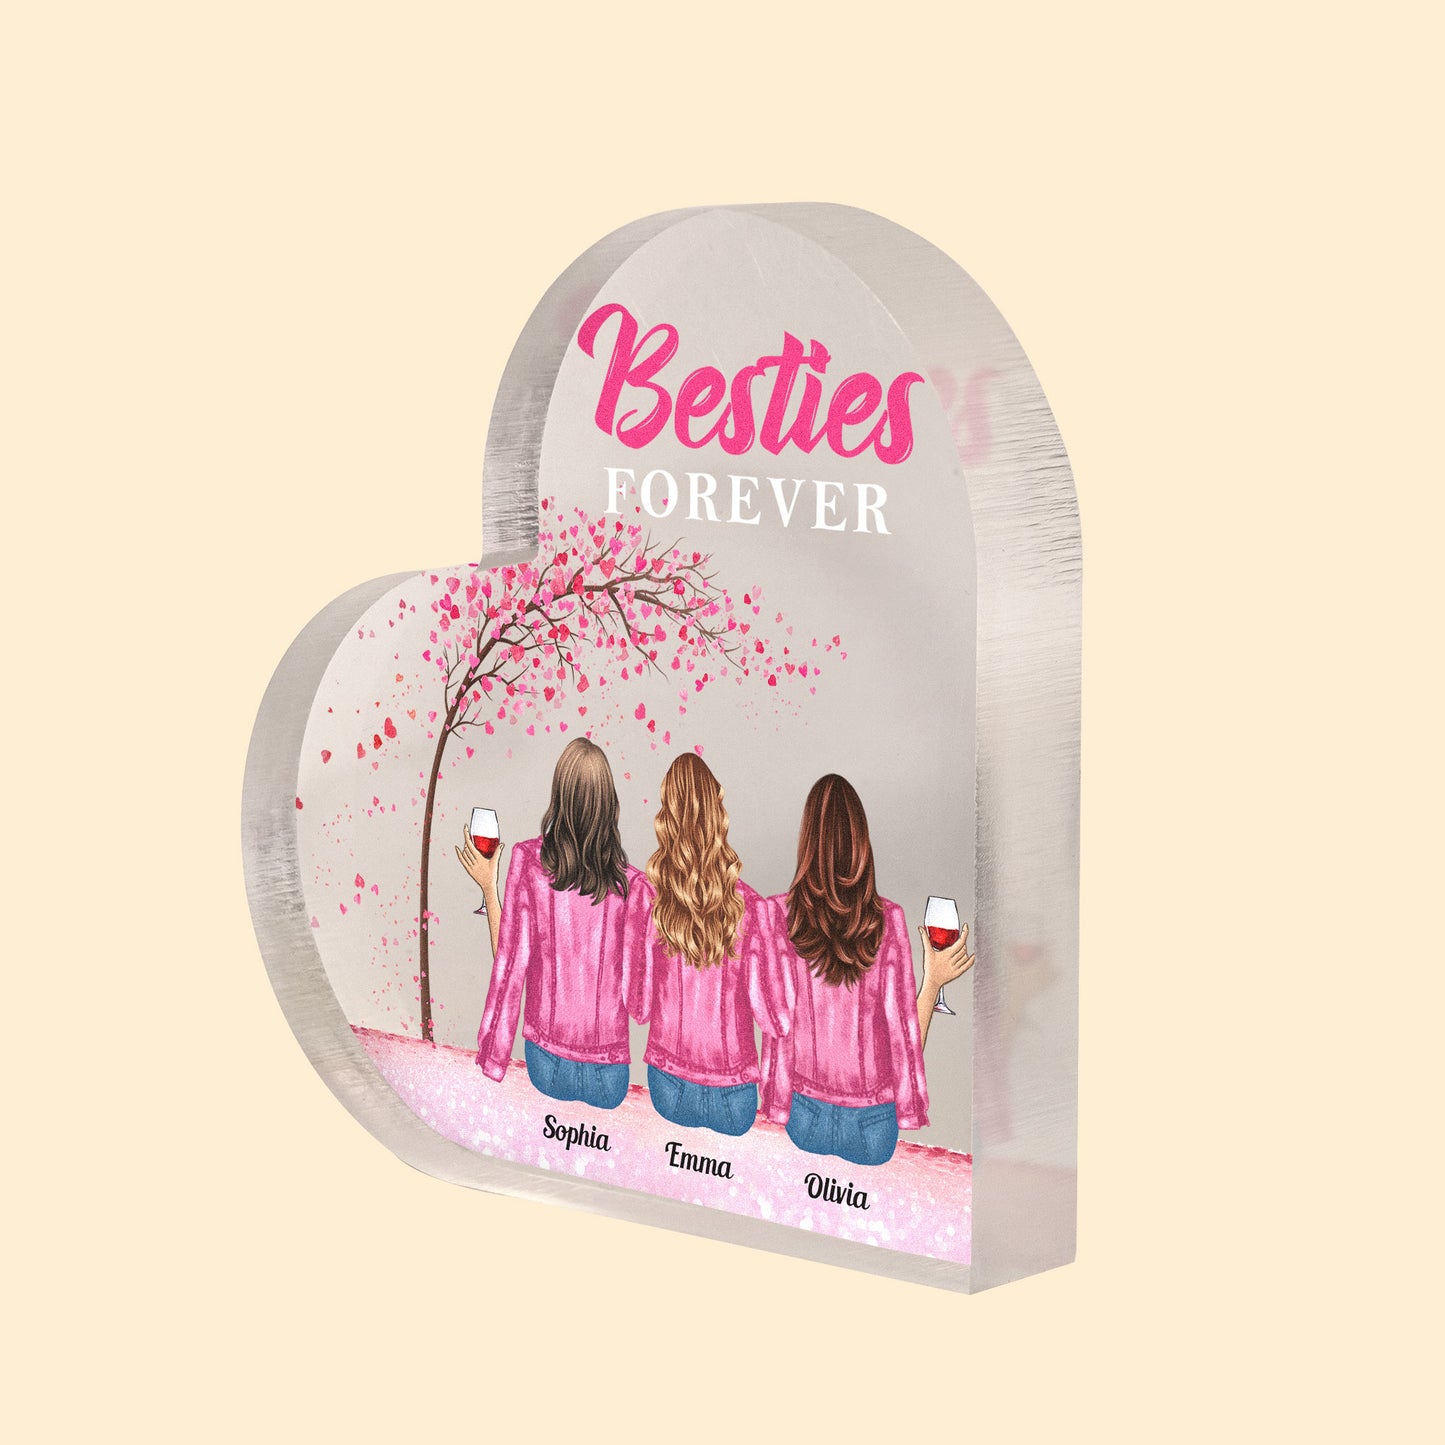 Forever Besties - Personalized Heart-Shaped Acrylic Plaque - Birthday, Funny, Friendship Gift For Besties, BFF, Sisters